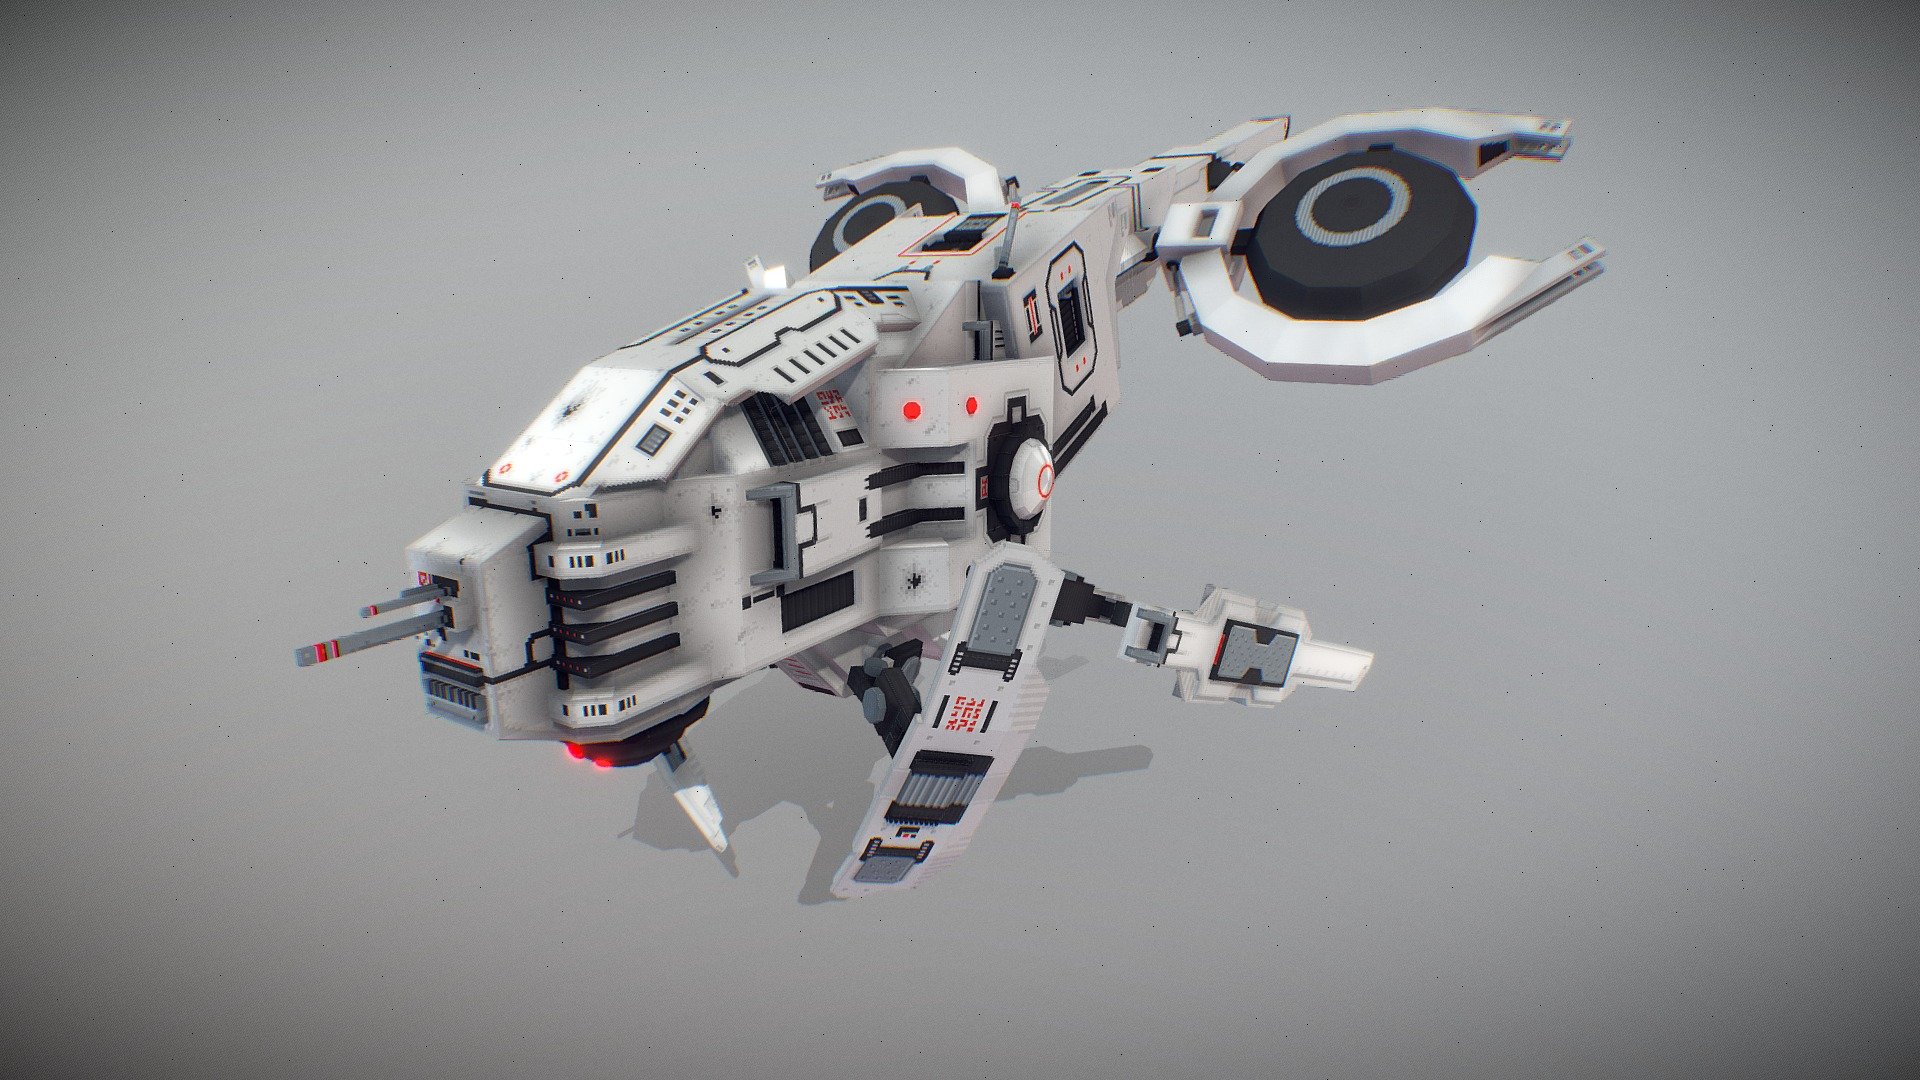 This drone driven by an ancient and powerful AI now compete in extremes races around the galaxy.

Its many scars shows how reckless yet durable this hovercraft is.



Made with Blockbench - Space drone - 3D model by Ony 3d model